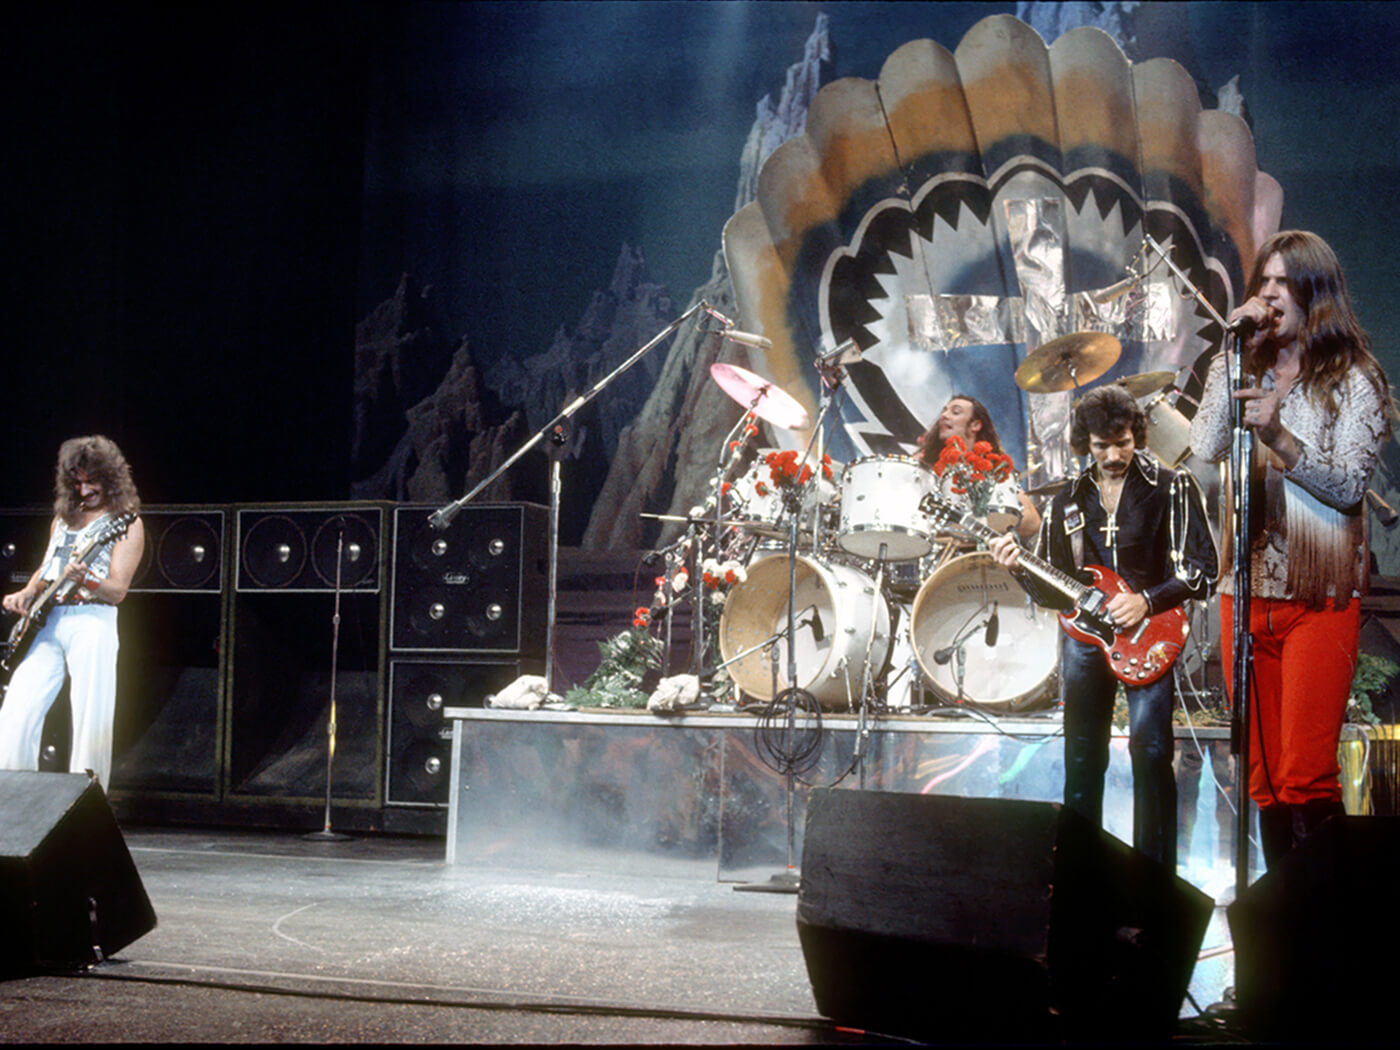 Black Sabbath performing 1970, photo by Michael Ochs Archives/Stringer via Getty Images